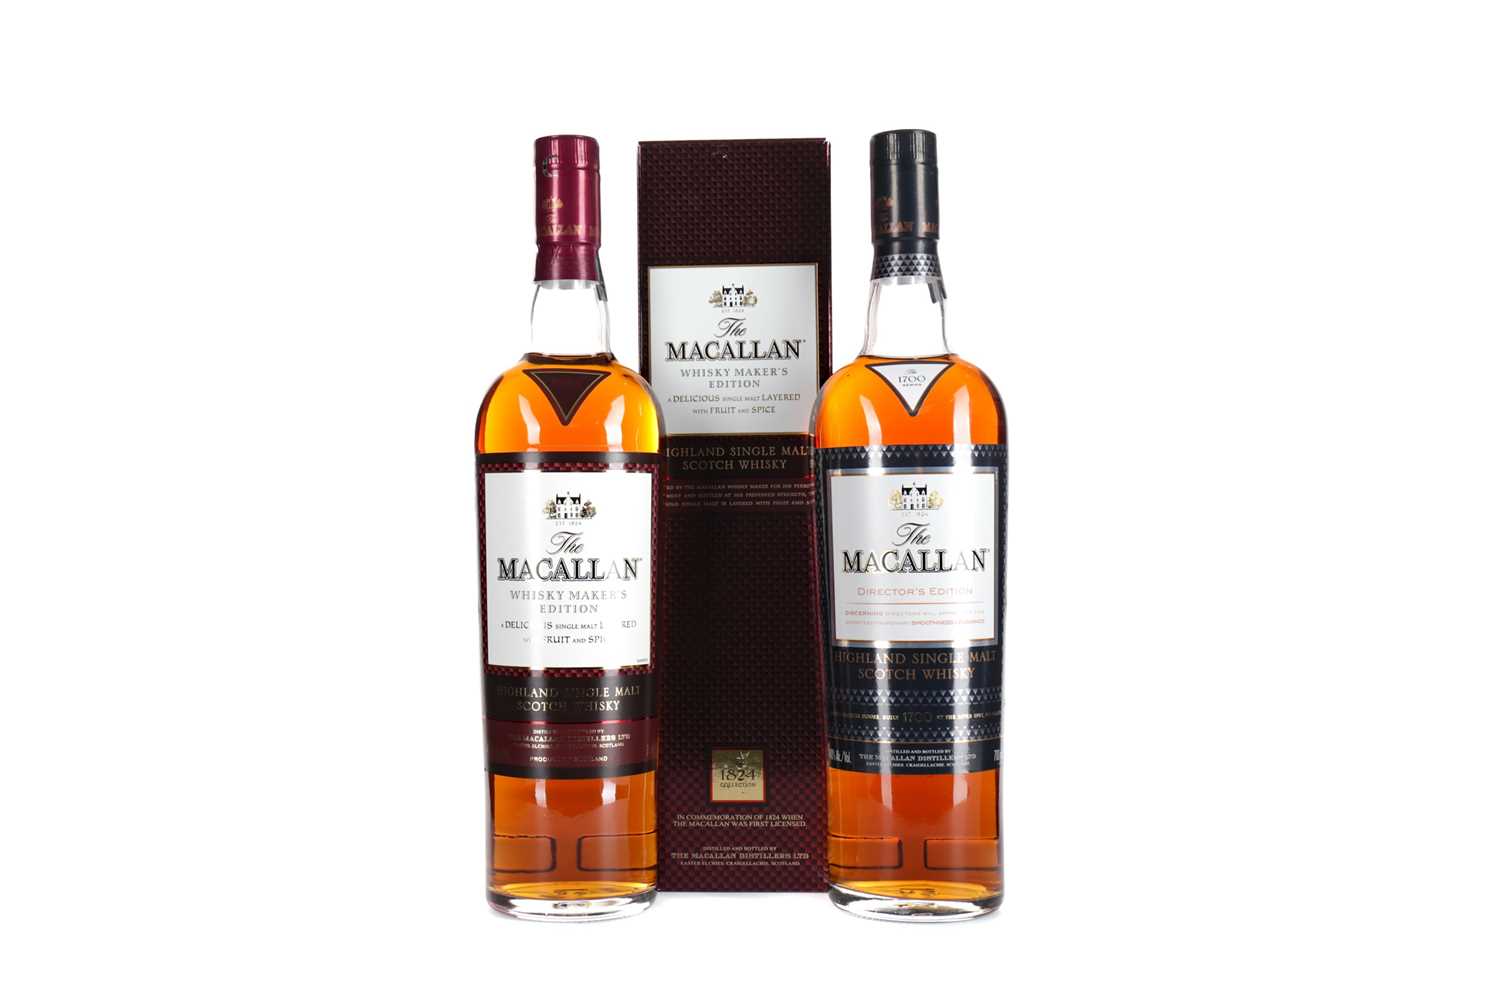 Lot 199 - MACALLAN DIRECTOR'S EDITION AND MACALLAN WHISKY MAKER'S EDITION